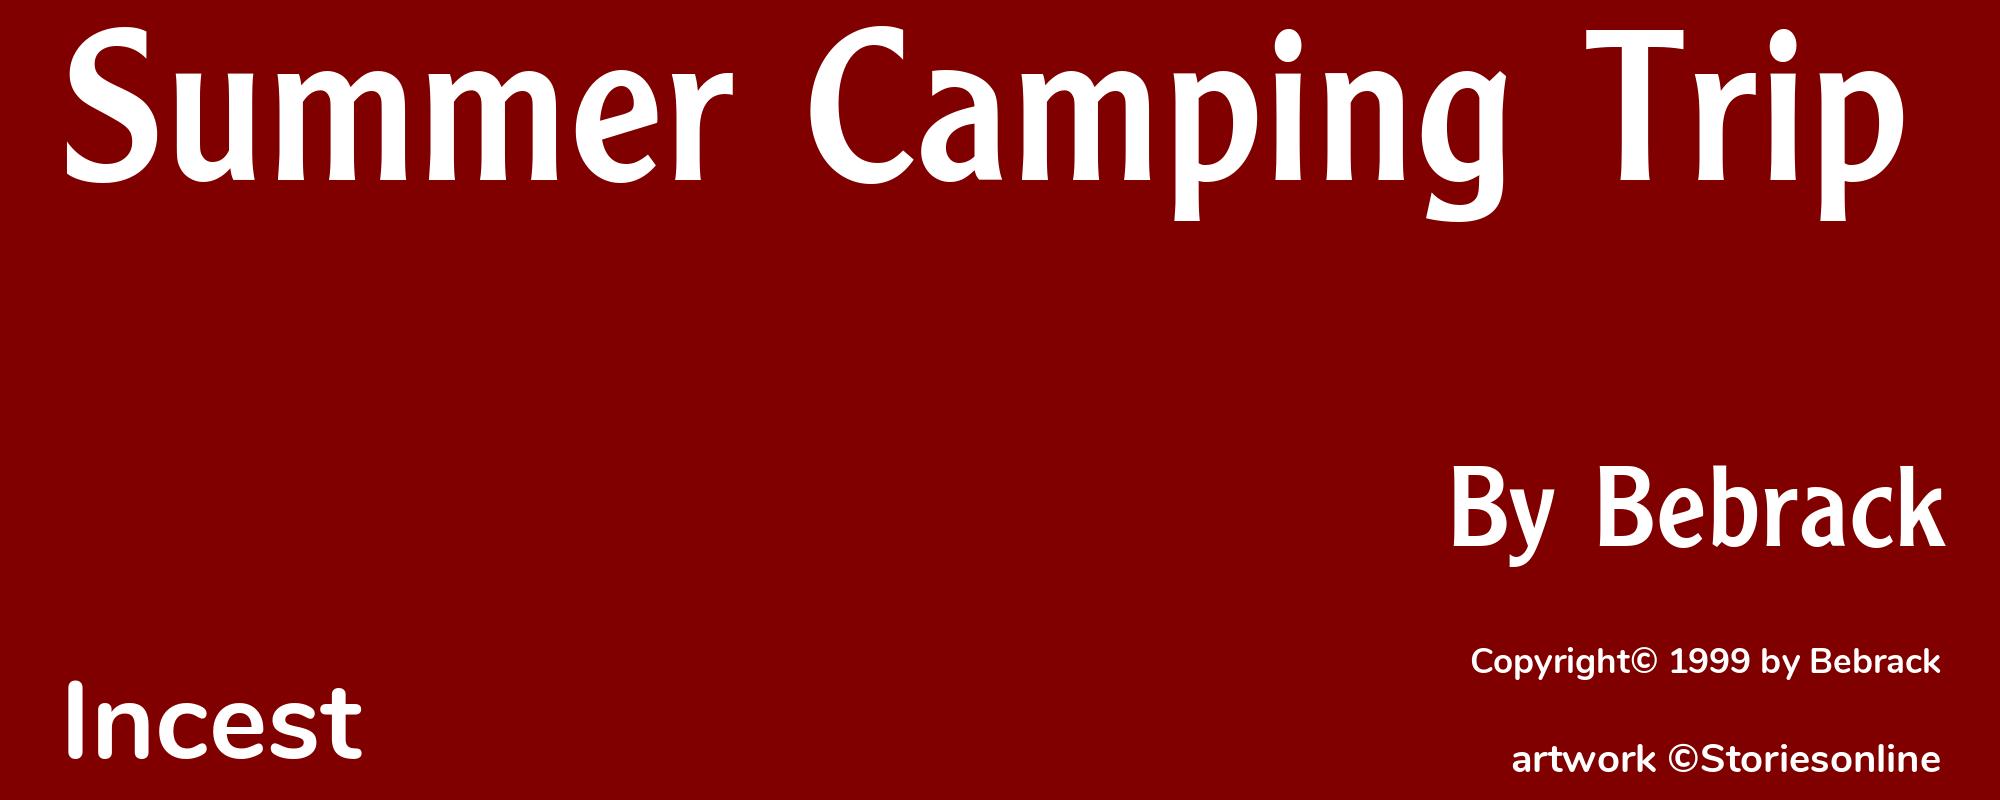 Summer Camping Trip - Cover